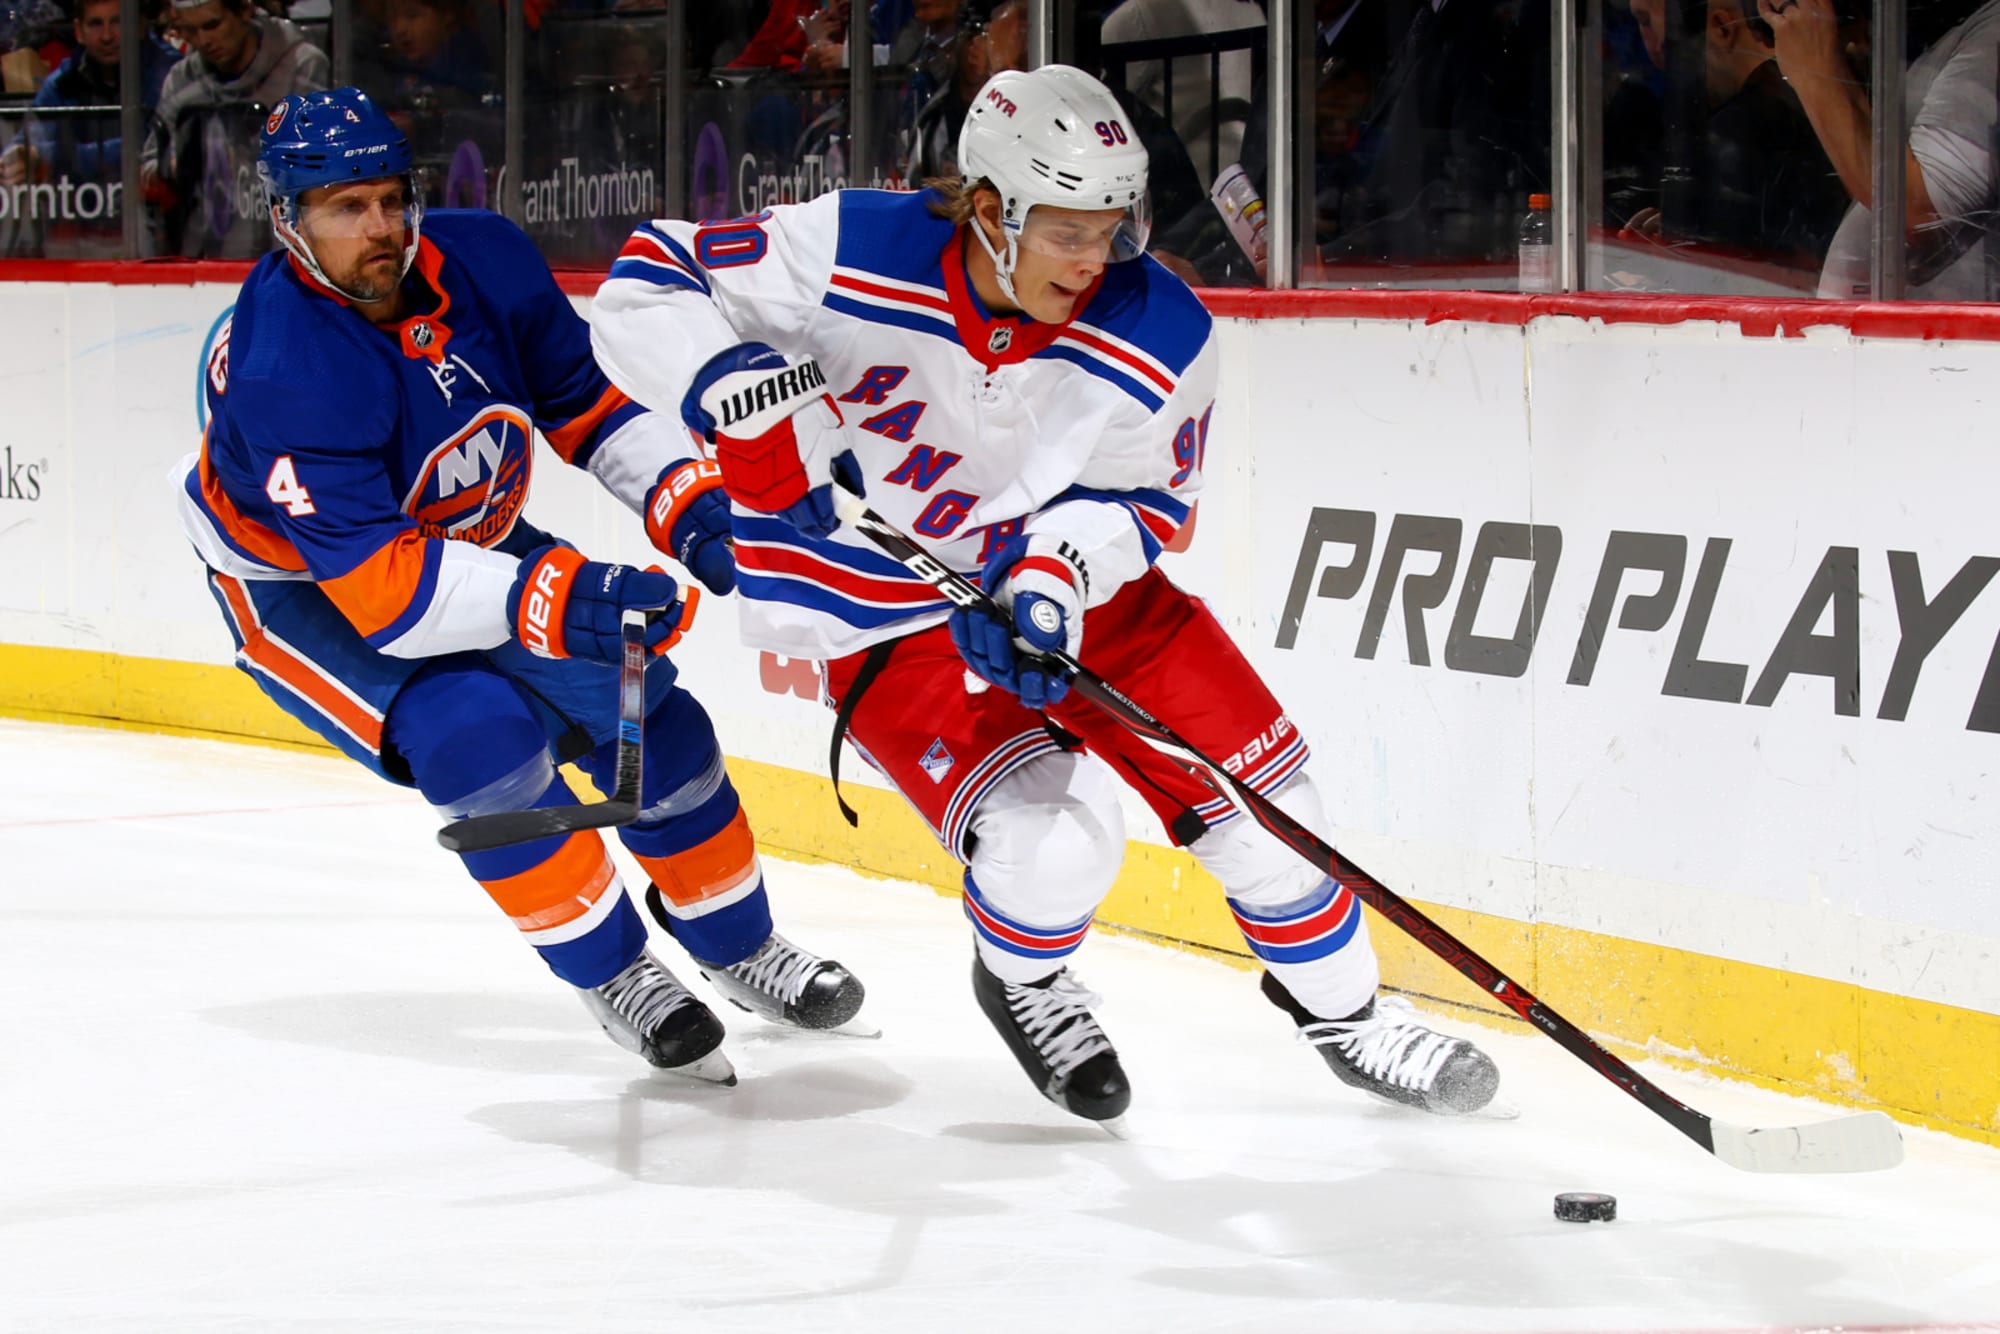 New York Rangers 4 teams that may want to add center by trade deadline